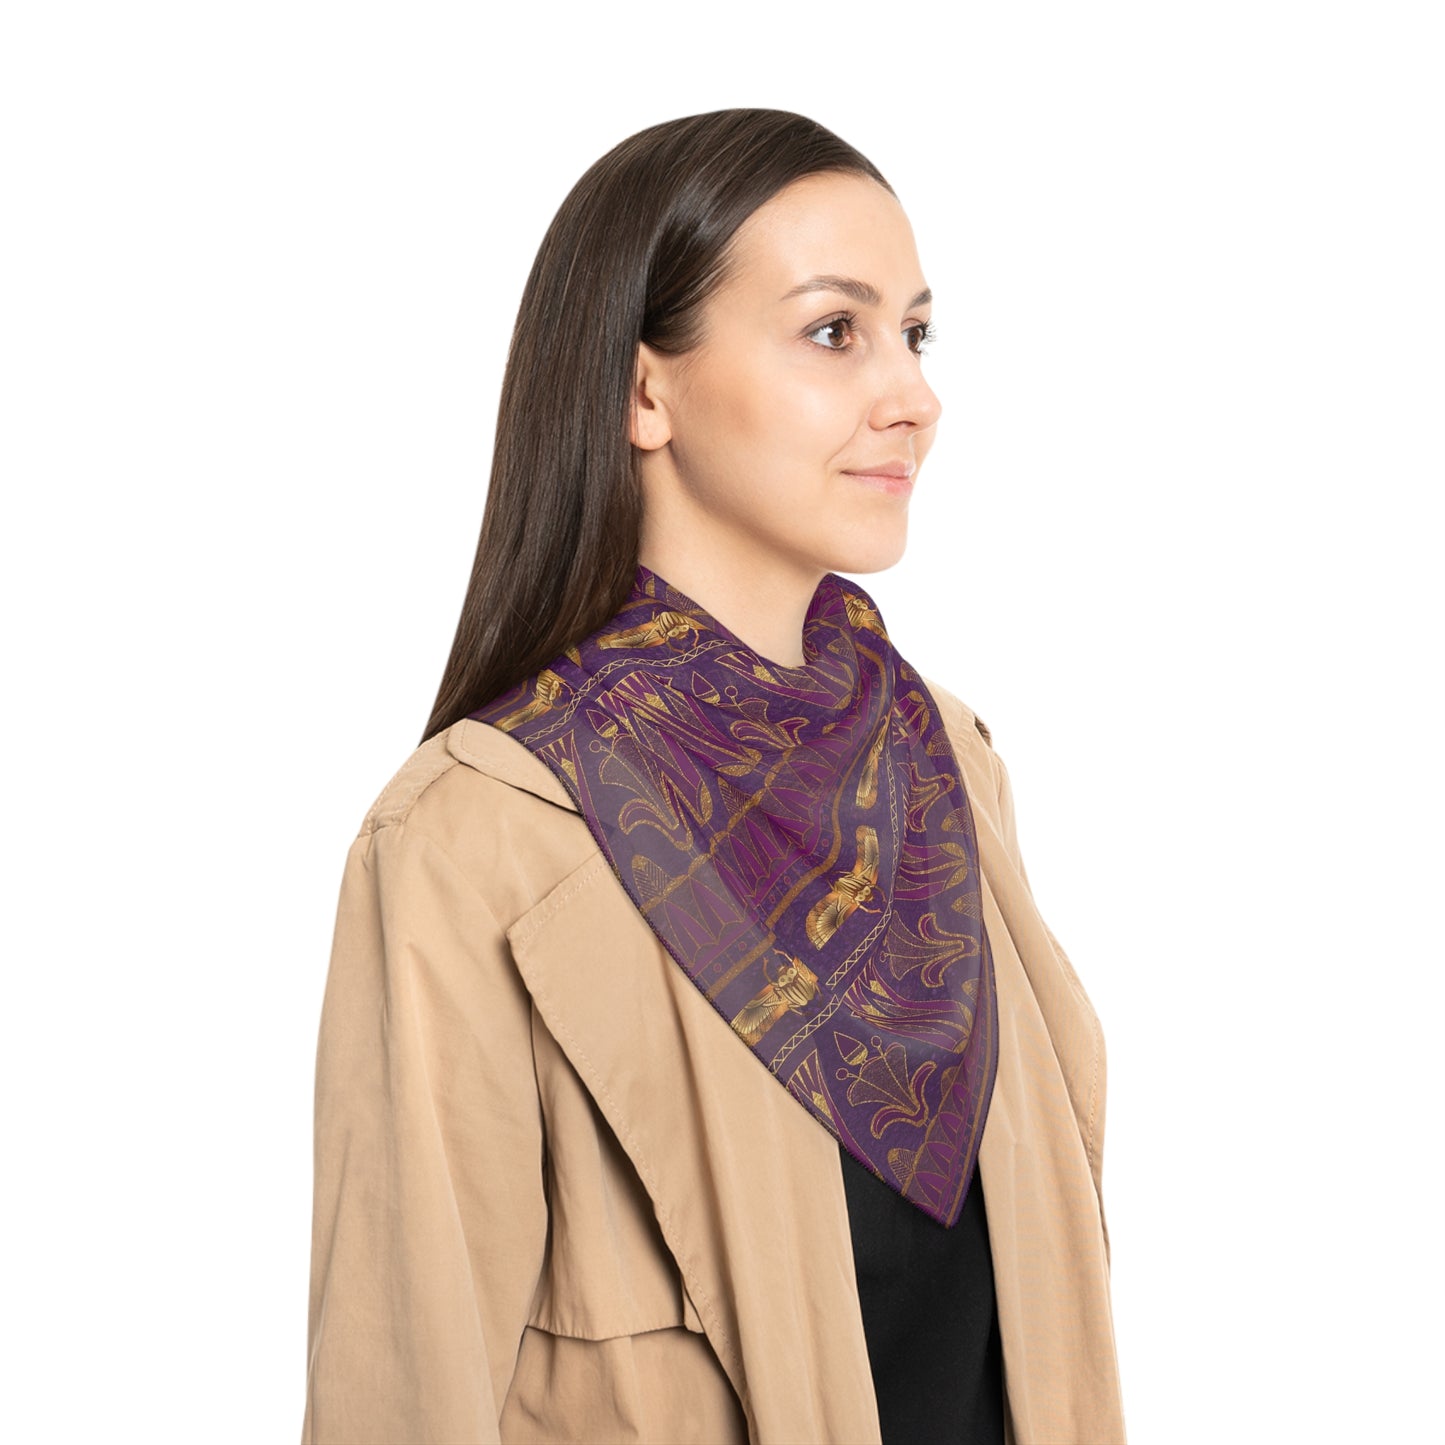 Egyptian Flower & Scarab Witches Veil | Pagan Witchy Scarf